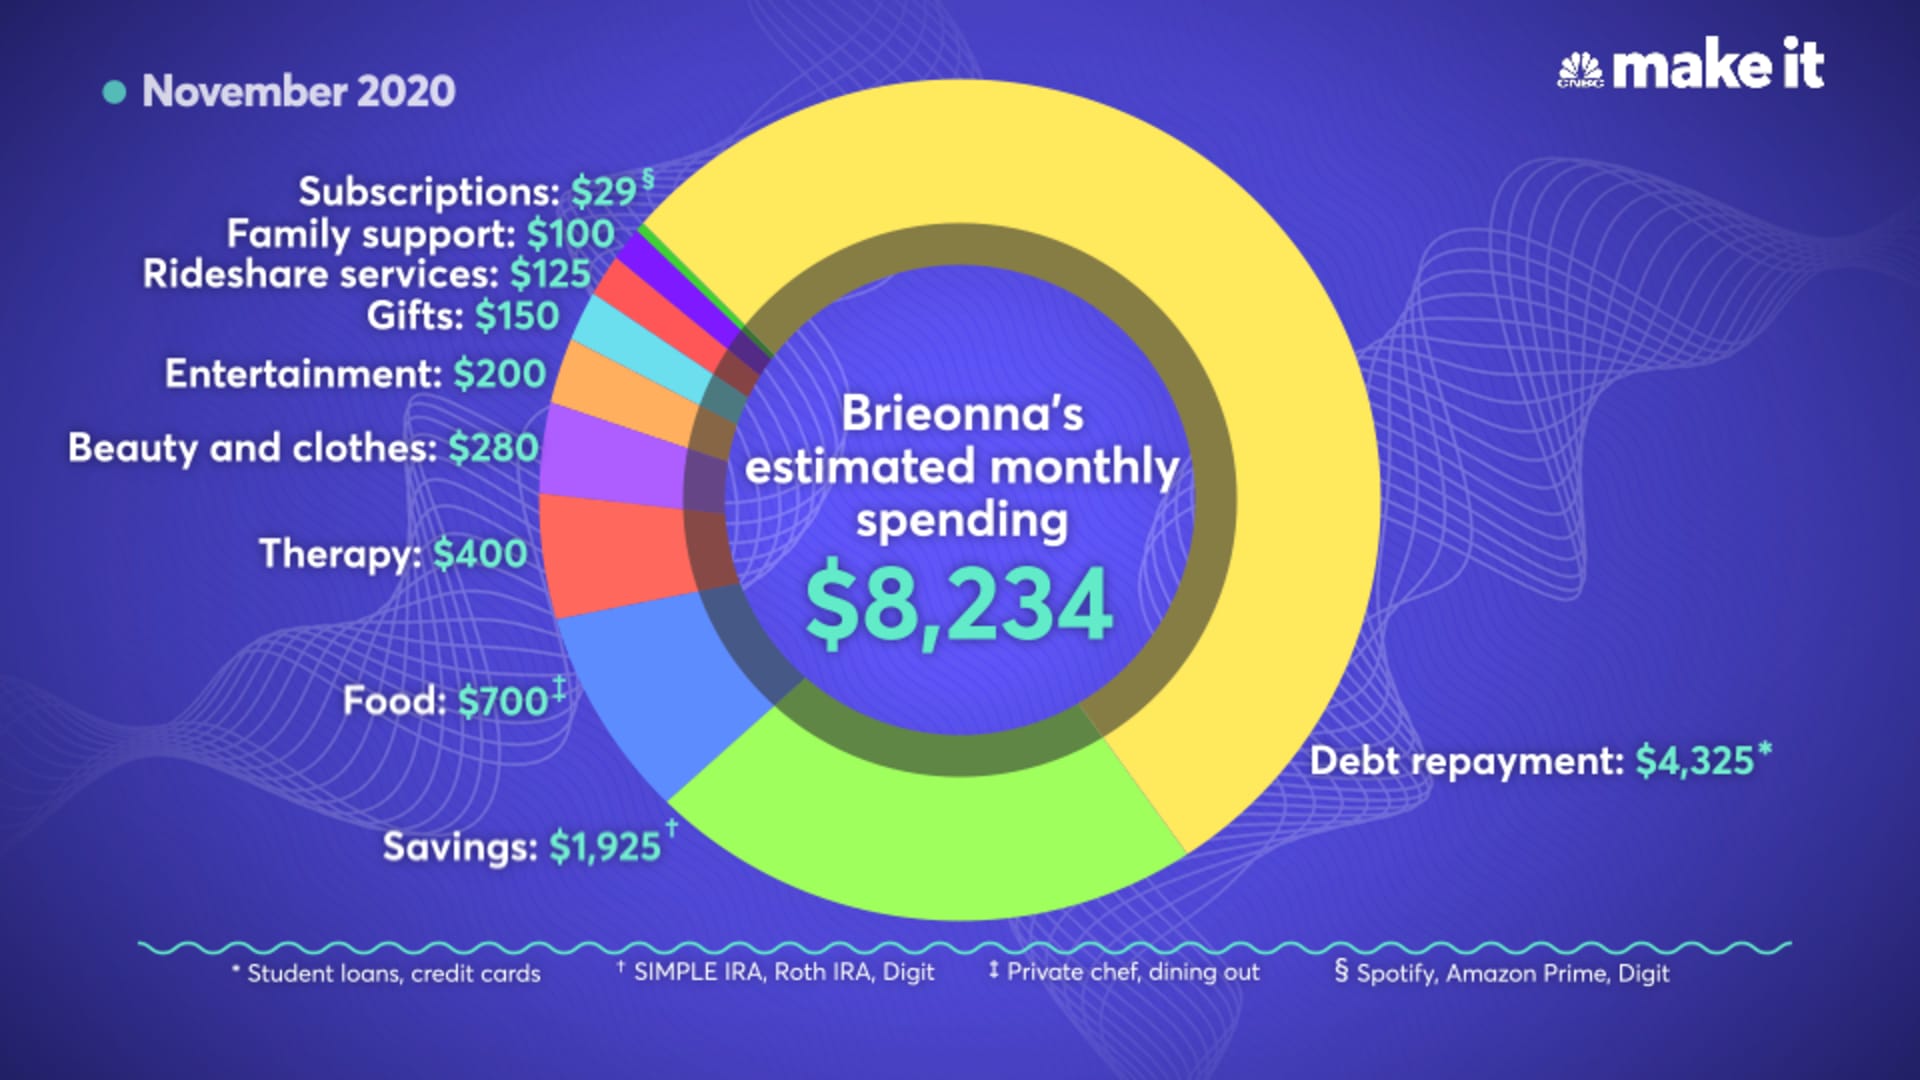 Brieonna Johnson's estimated monthly expenses for November 2020.